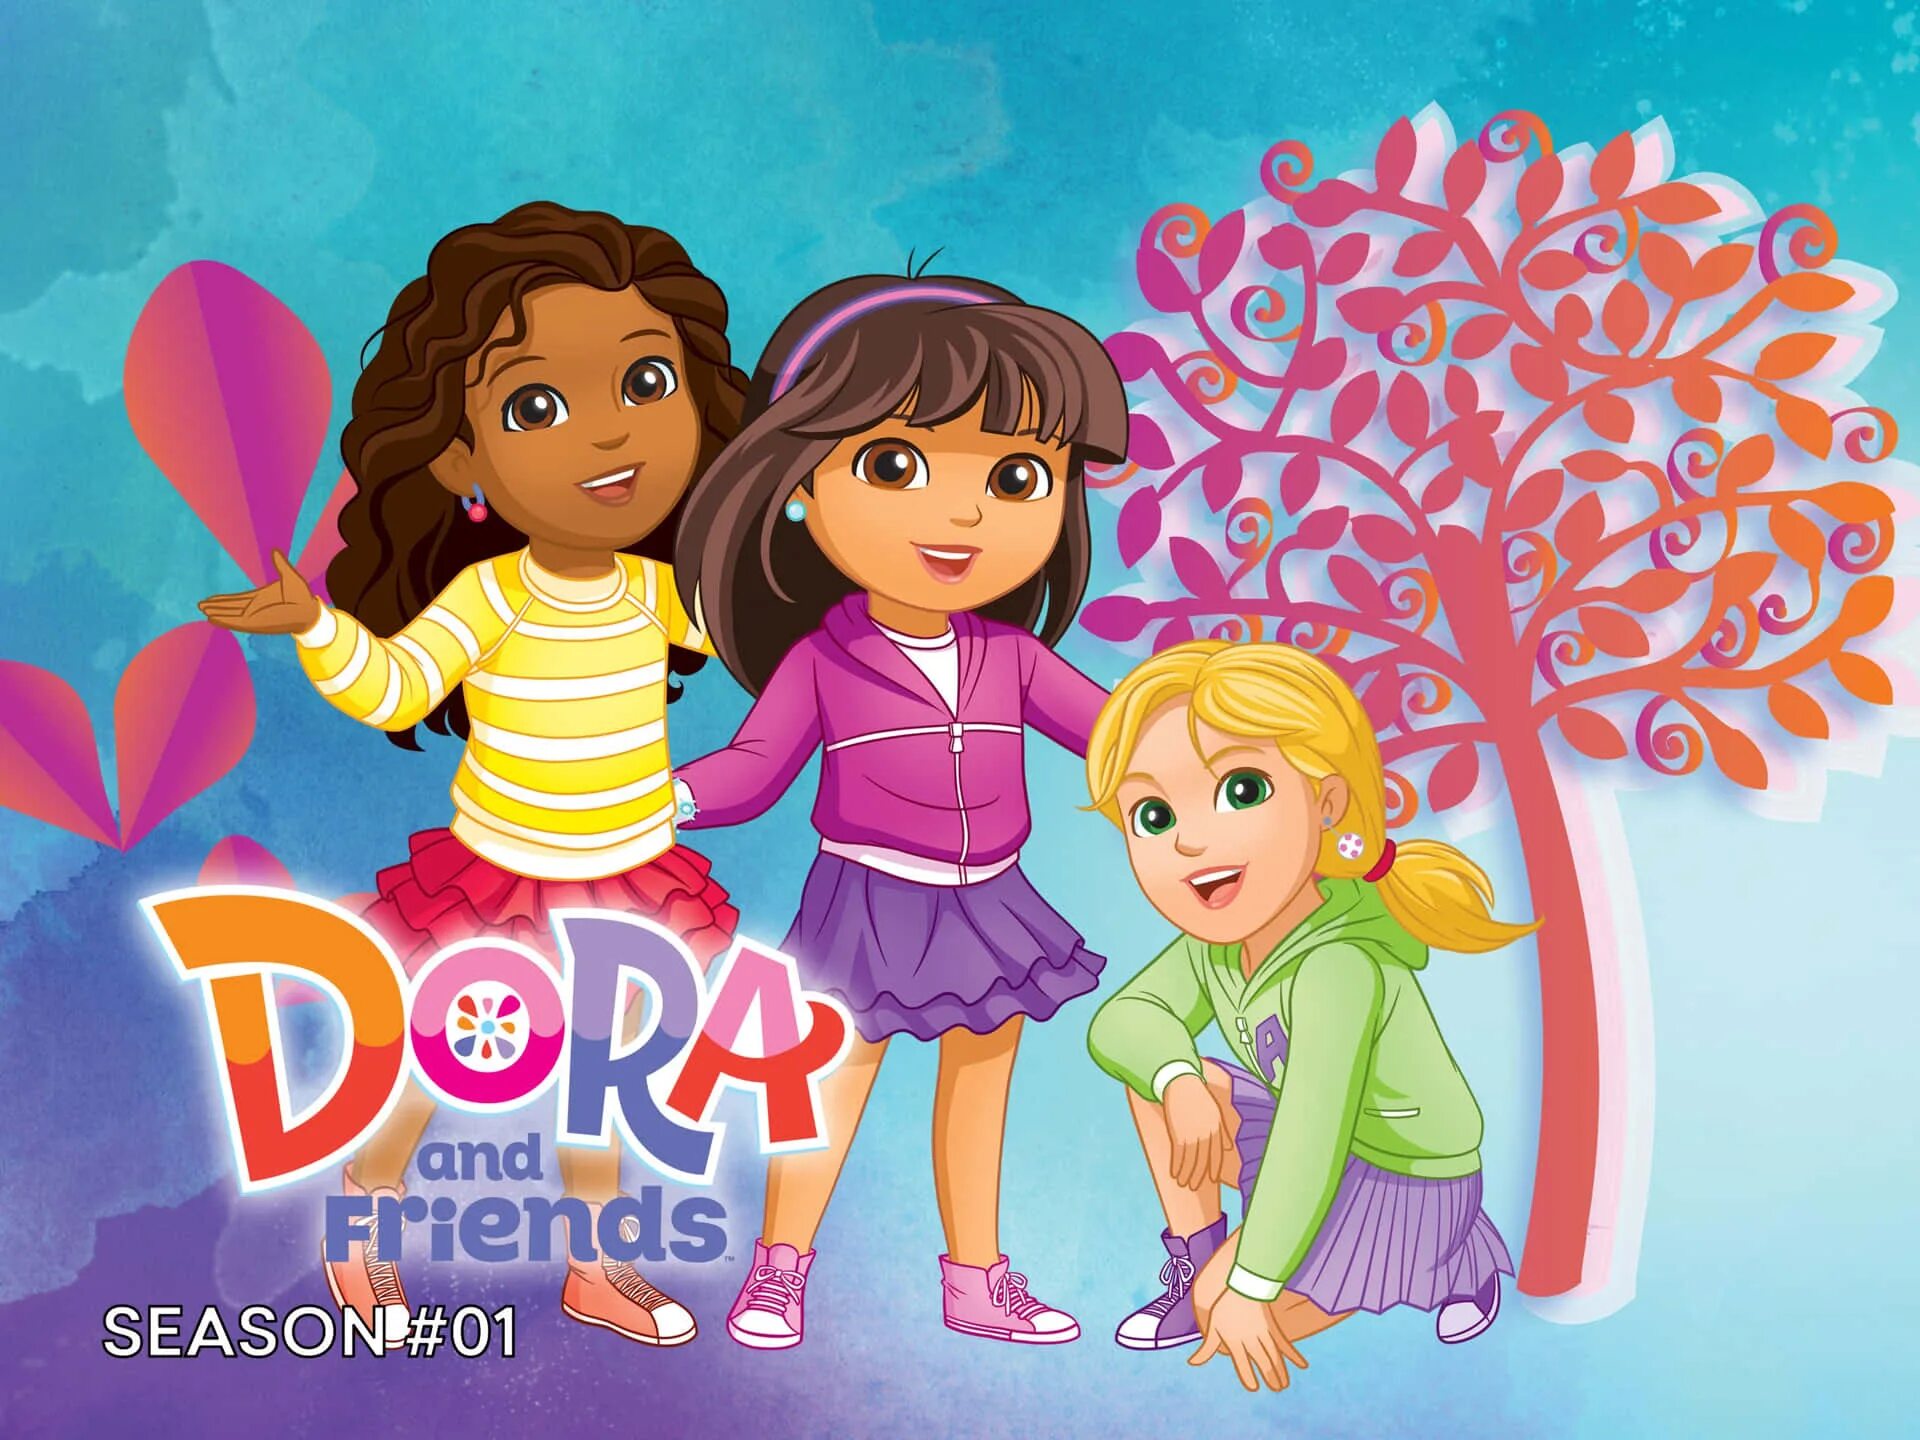 Dora and friends Кейт. Dora and friends into the City. Санни Дэй Dora and friends. Dora and friends into the City Alana.